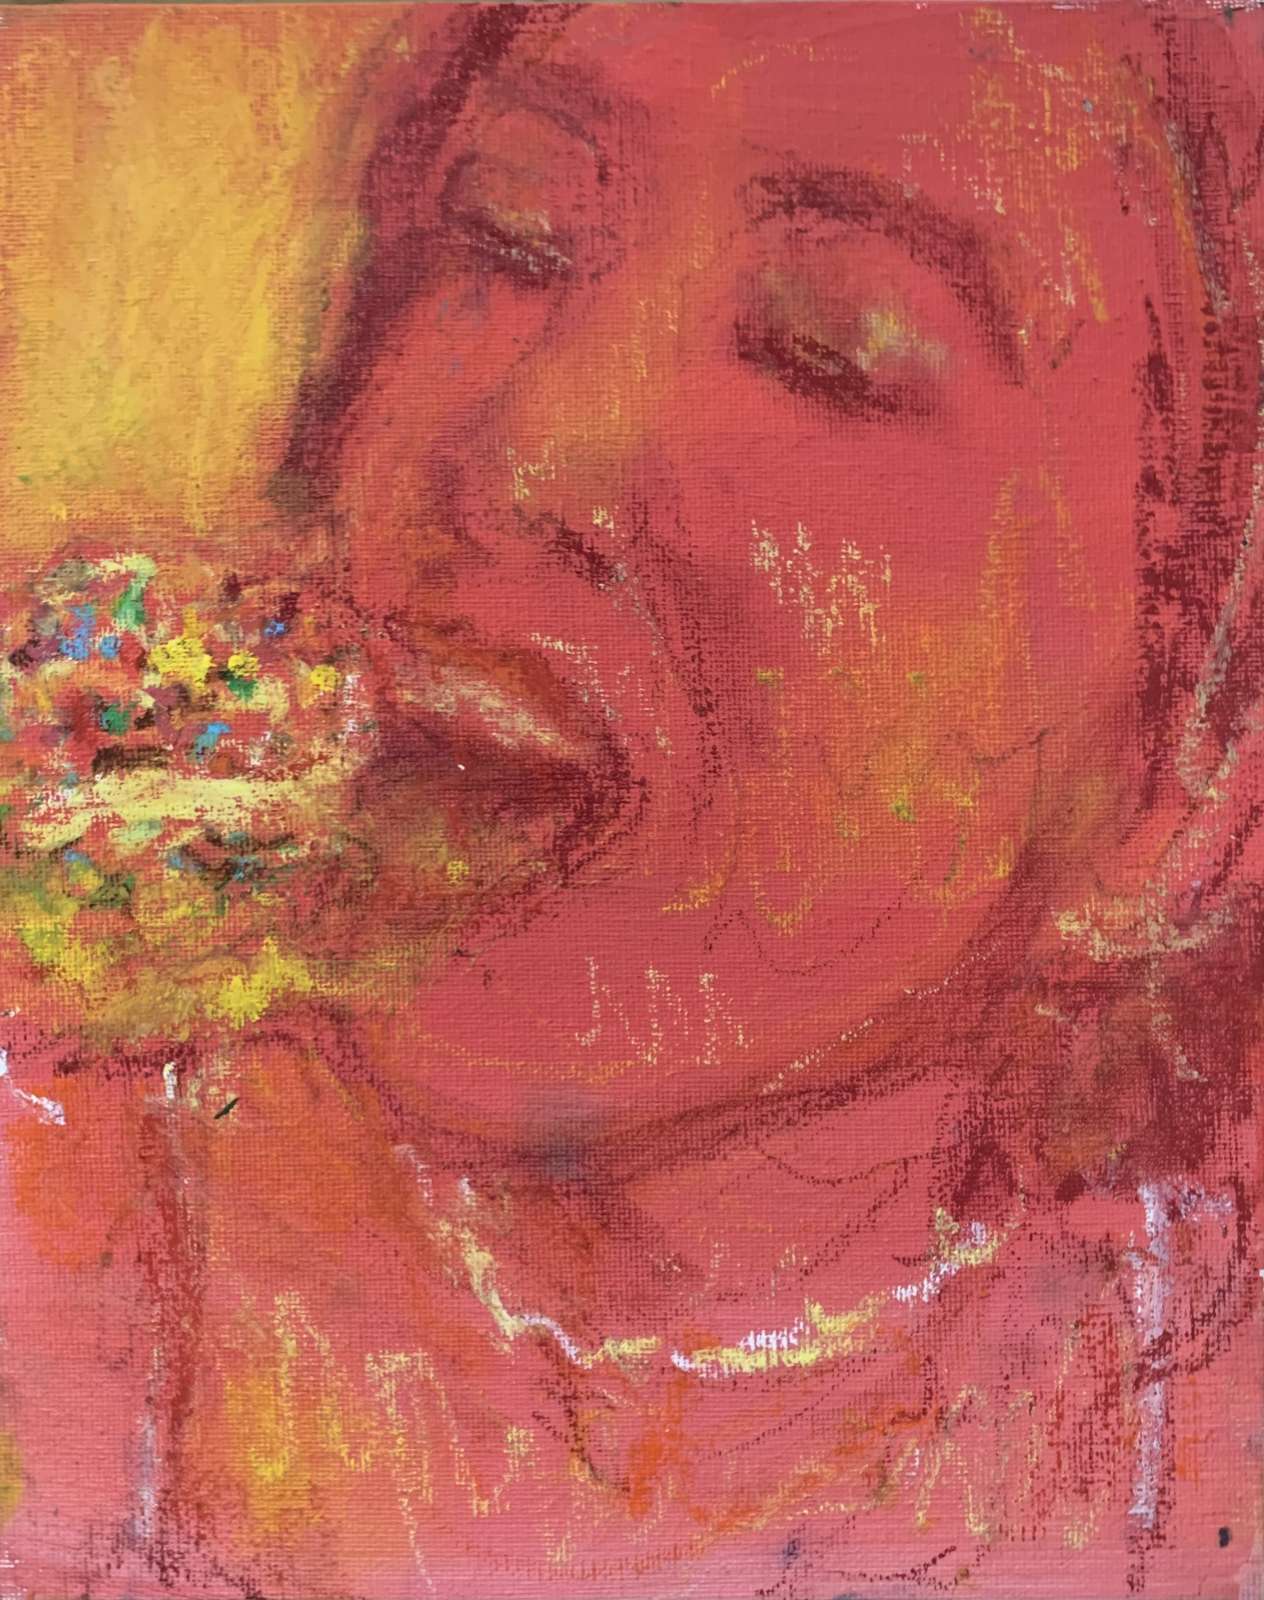 Caroline Wong, Hungry Woman 3, 2022, Acrylic, oil, and oil pastel on canvas board, 20.3 x 25.4 cm,